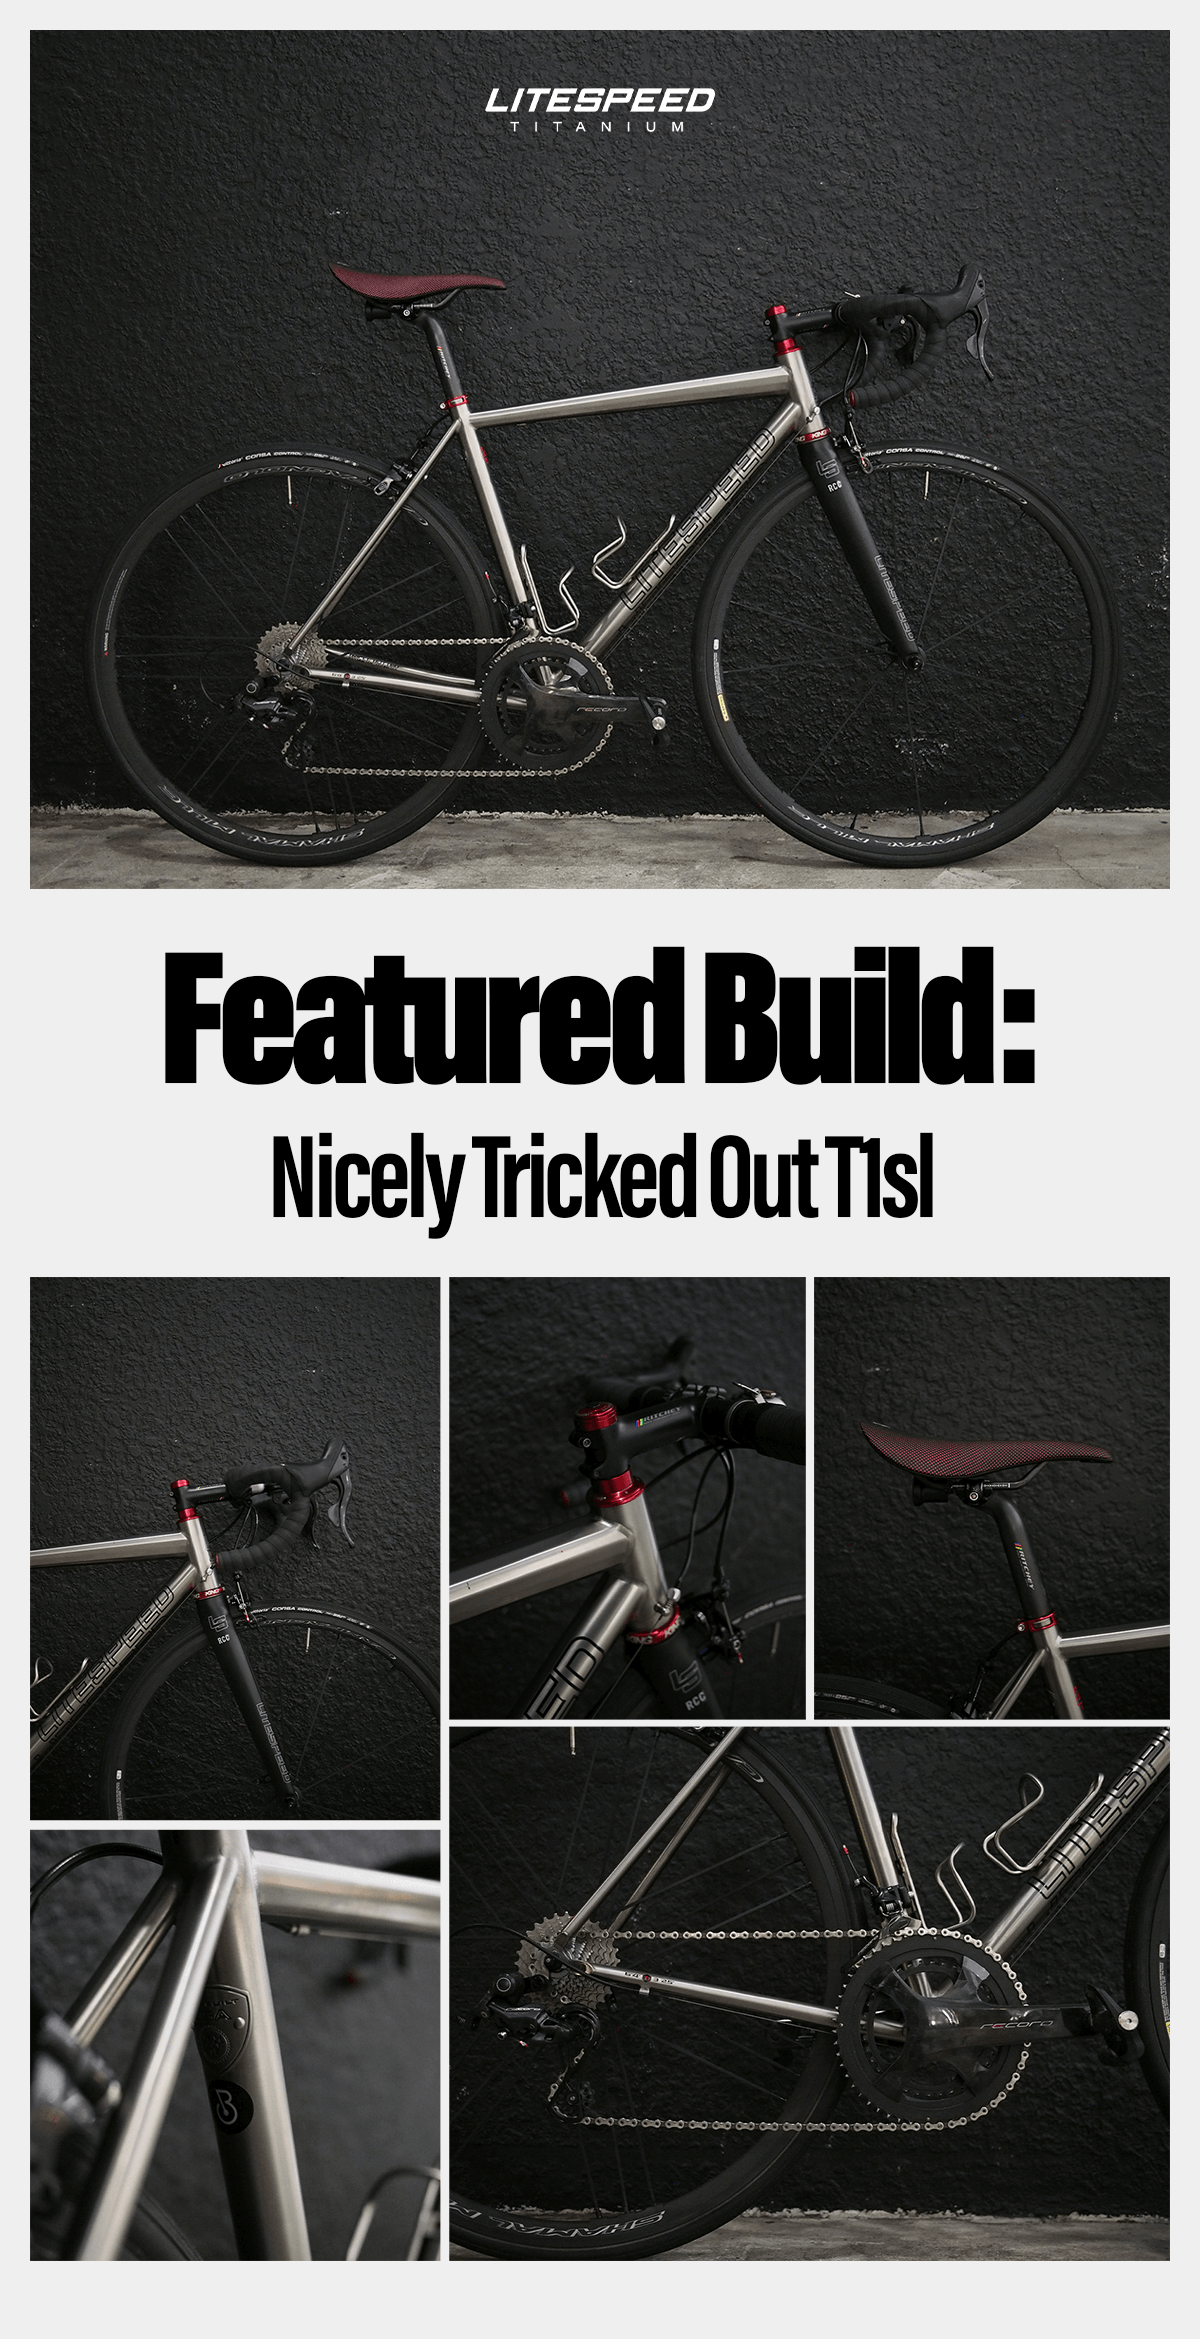 Featured Build: Nicely Tricked Out T1sl